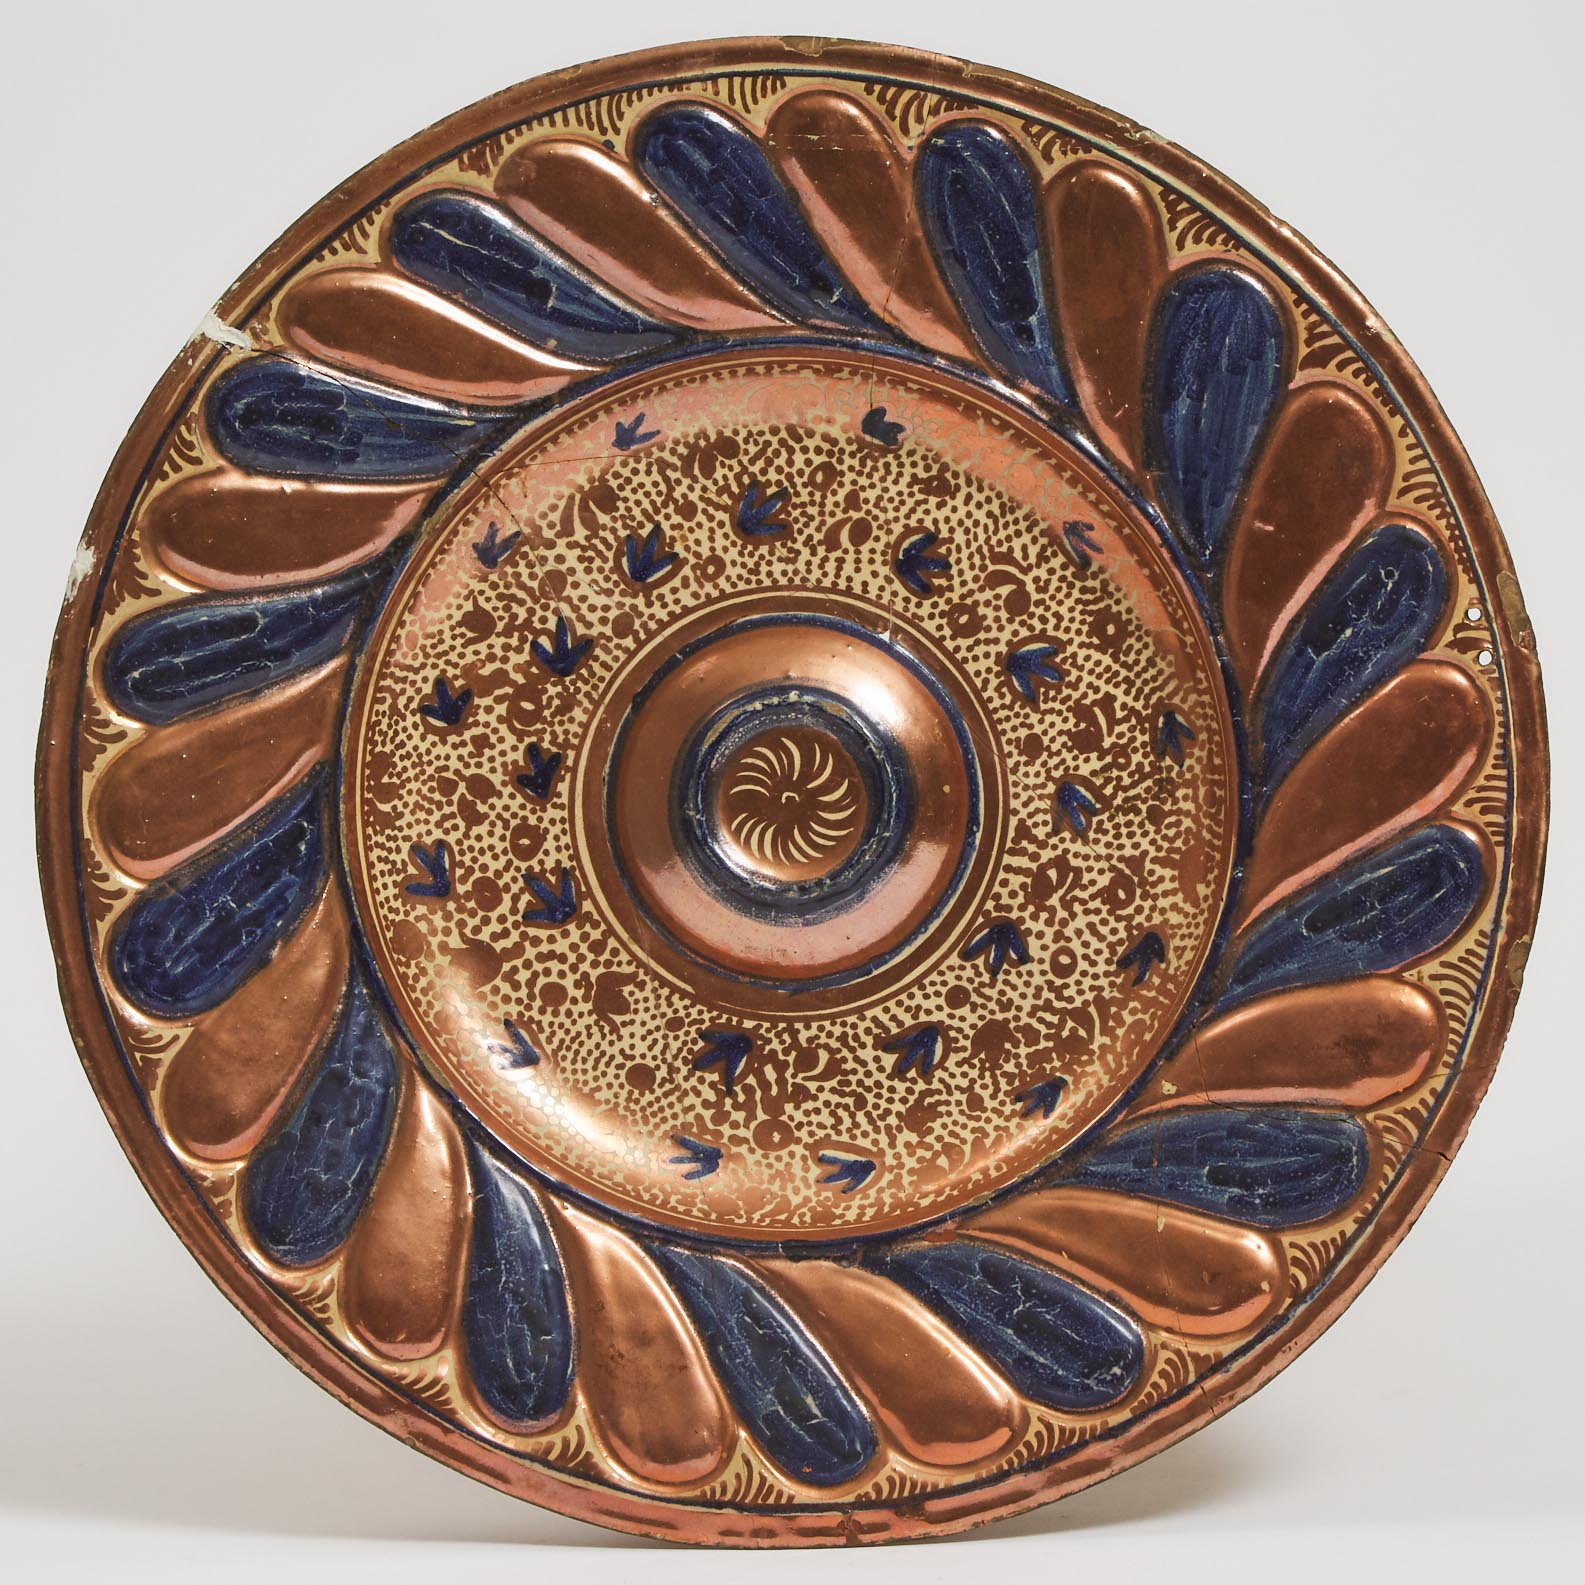 Hispano-Moresque Copper Lustre Decorated Earthenware Raised Boss Charger, 17th century or later